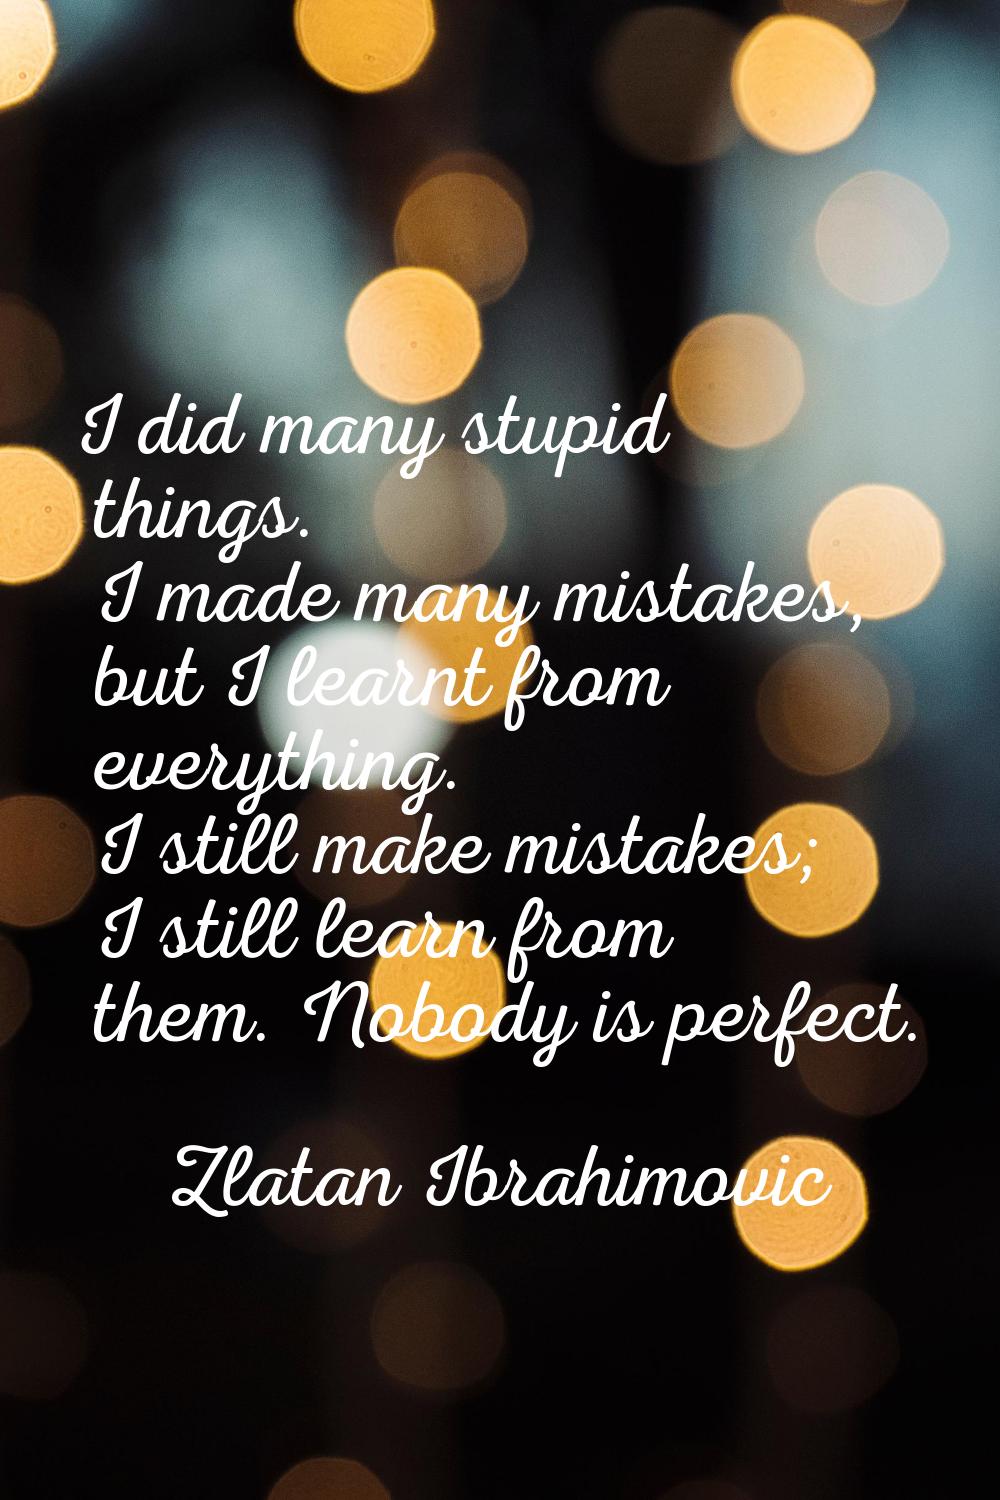 I did many stupid things. I made many mistakes, but I learnt from everything. I still make mistakes